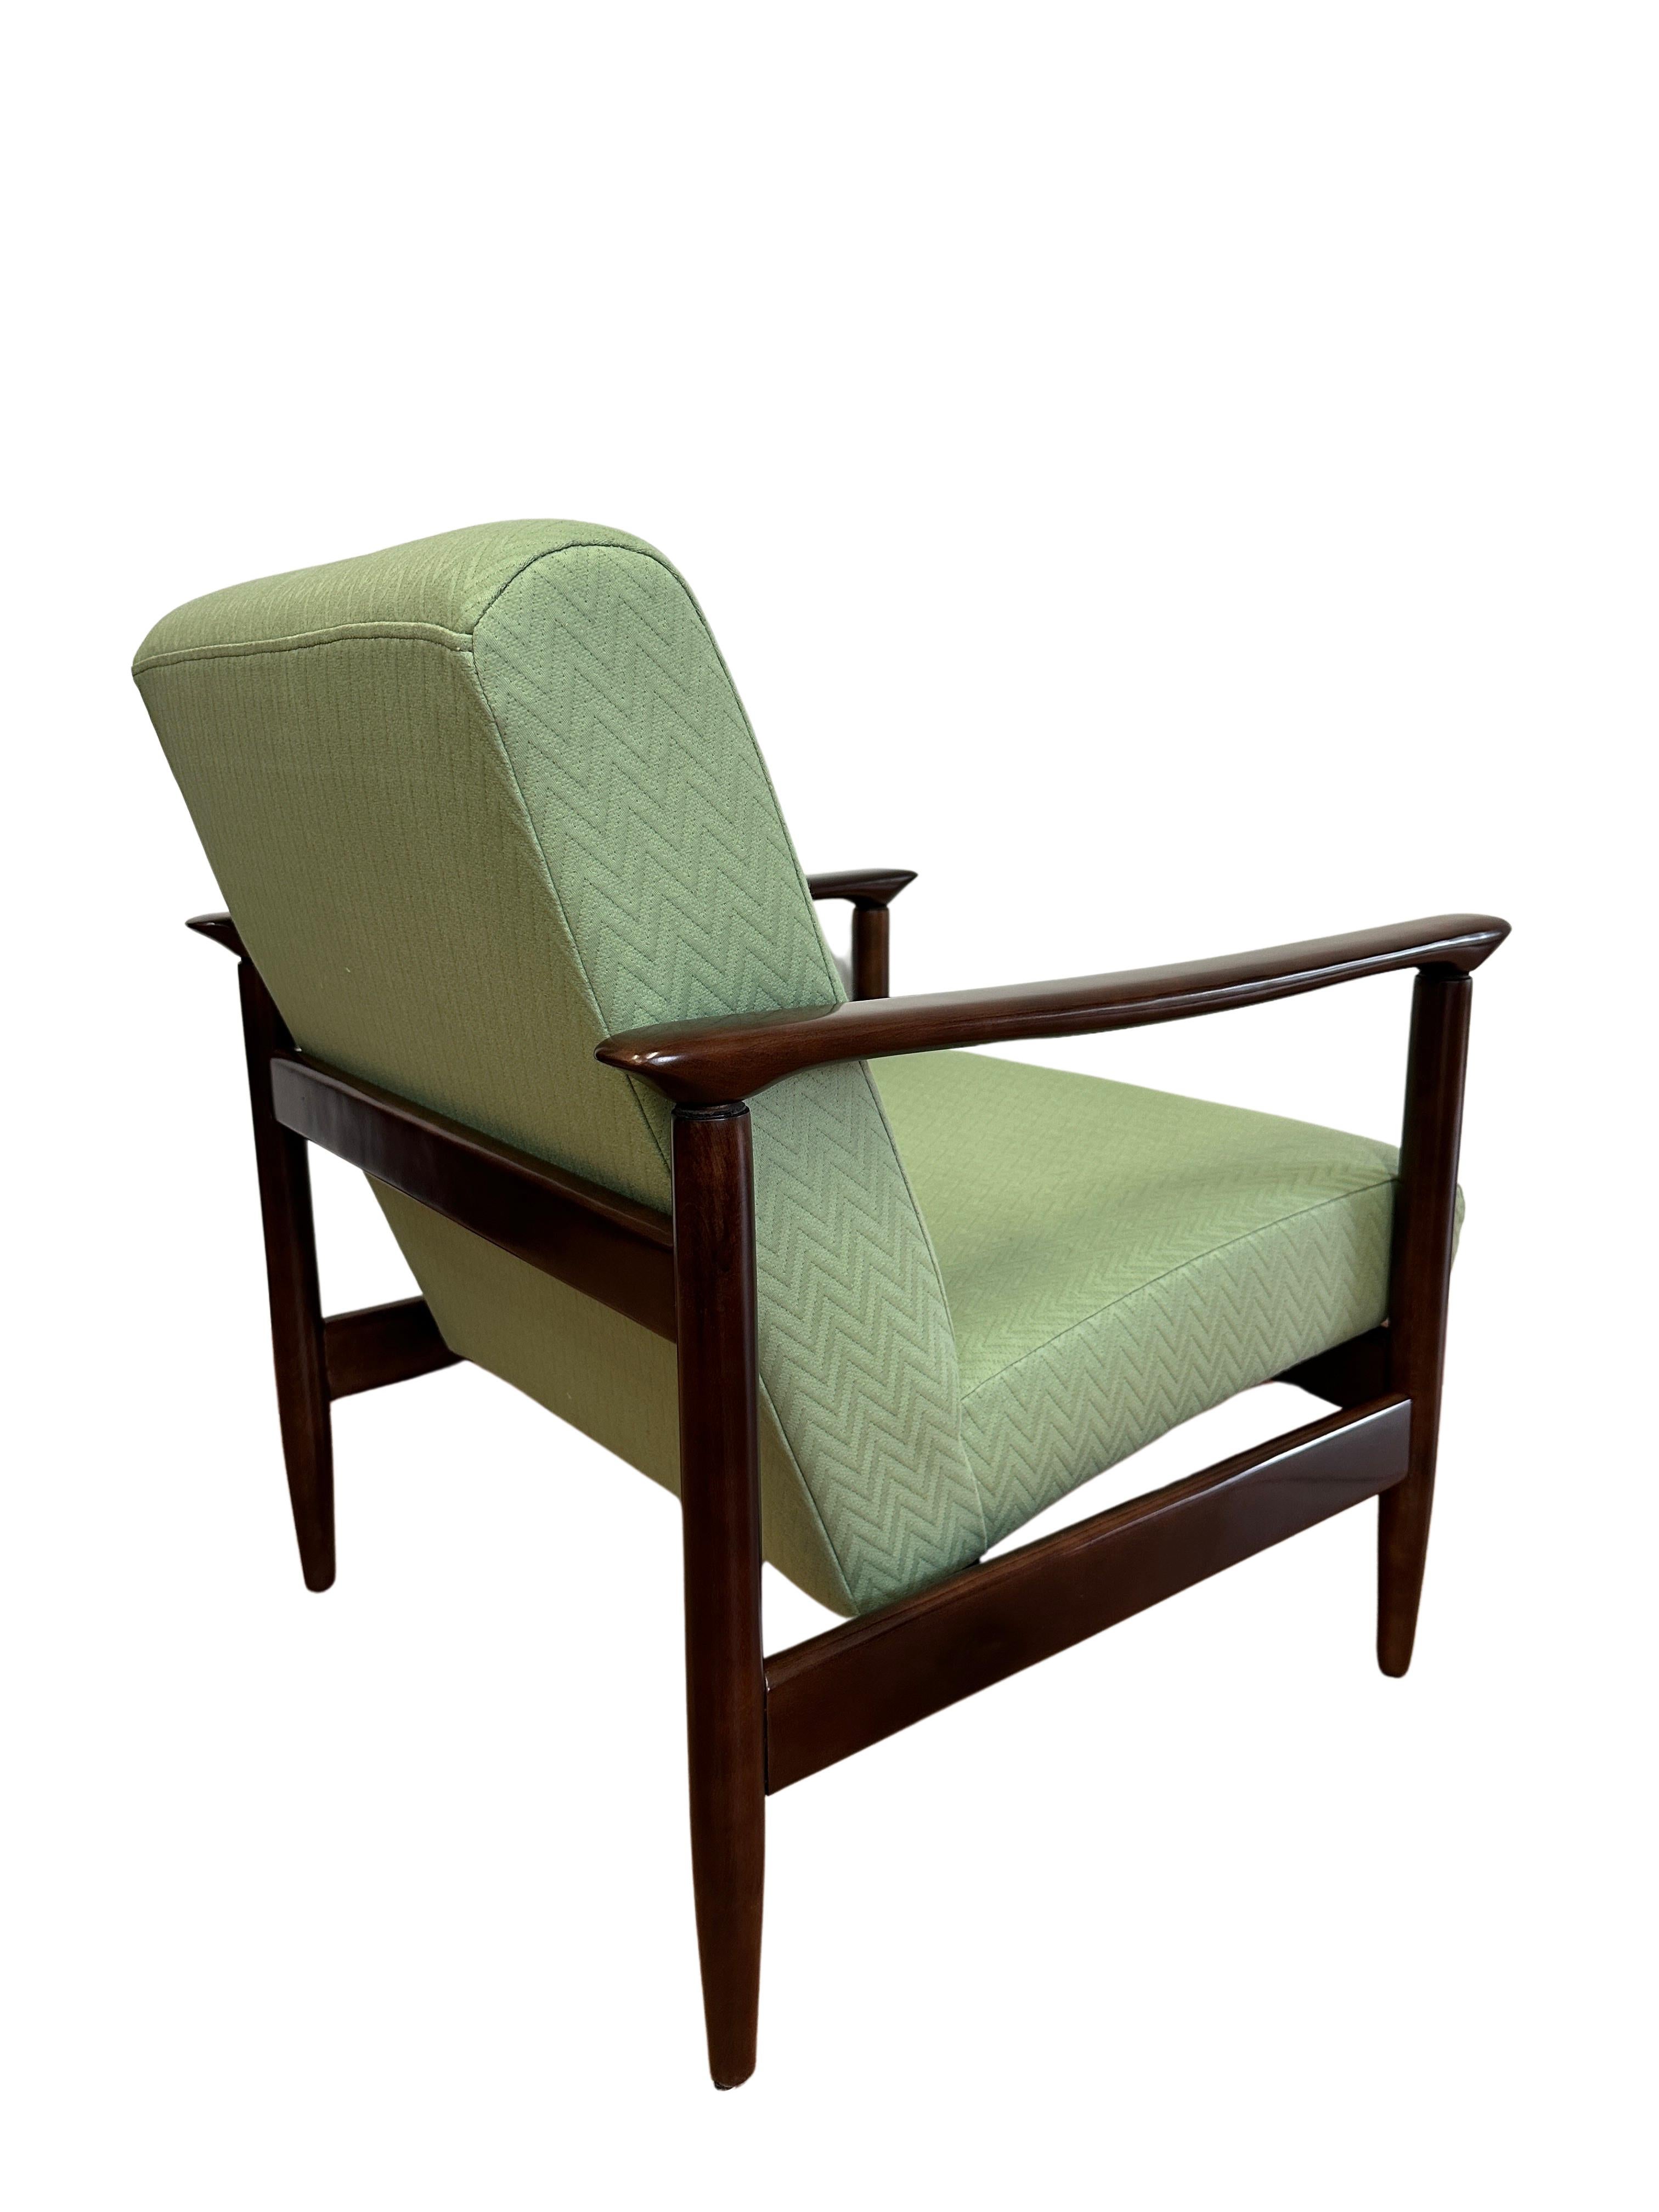 Mid Century Armchair in Green Missoni Upholstery, by Edmund Homa, 1960s For Sale 3